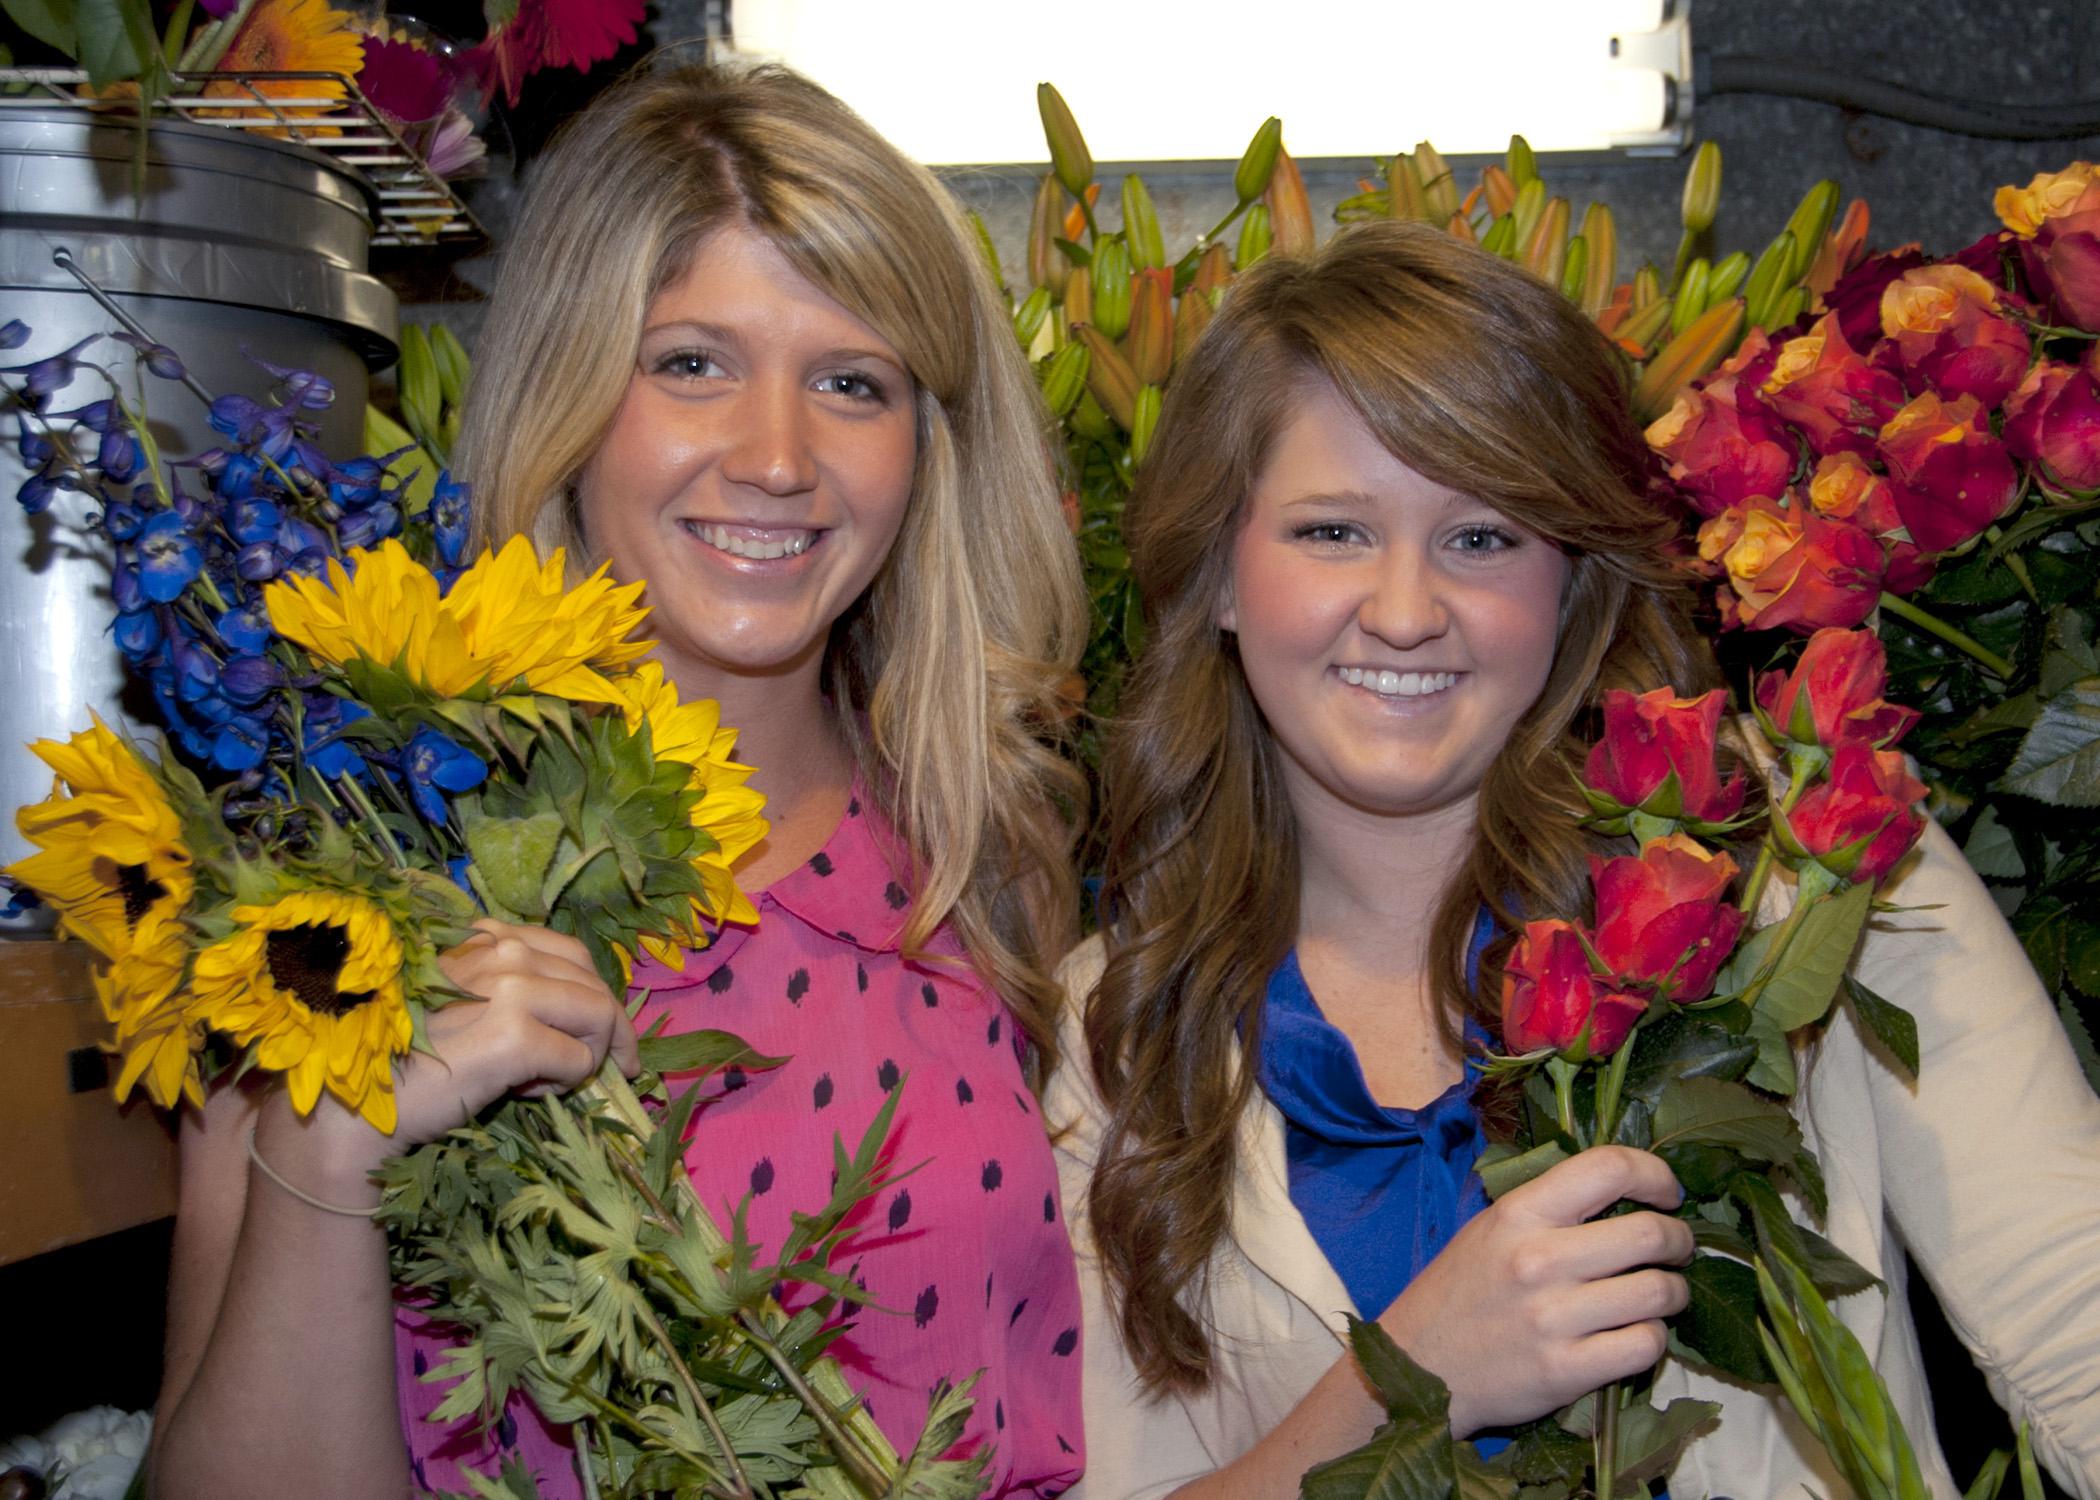 Mississippi State University senior Elizabeth McDougald of Starkville and junior Brittany Sims of Kosciusko recently received the only two scholarships given by the American Institute of Floral Designers Foundation. (Photo by MSU Ag Communications/Kat Lawrence)